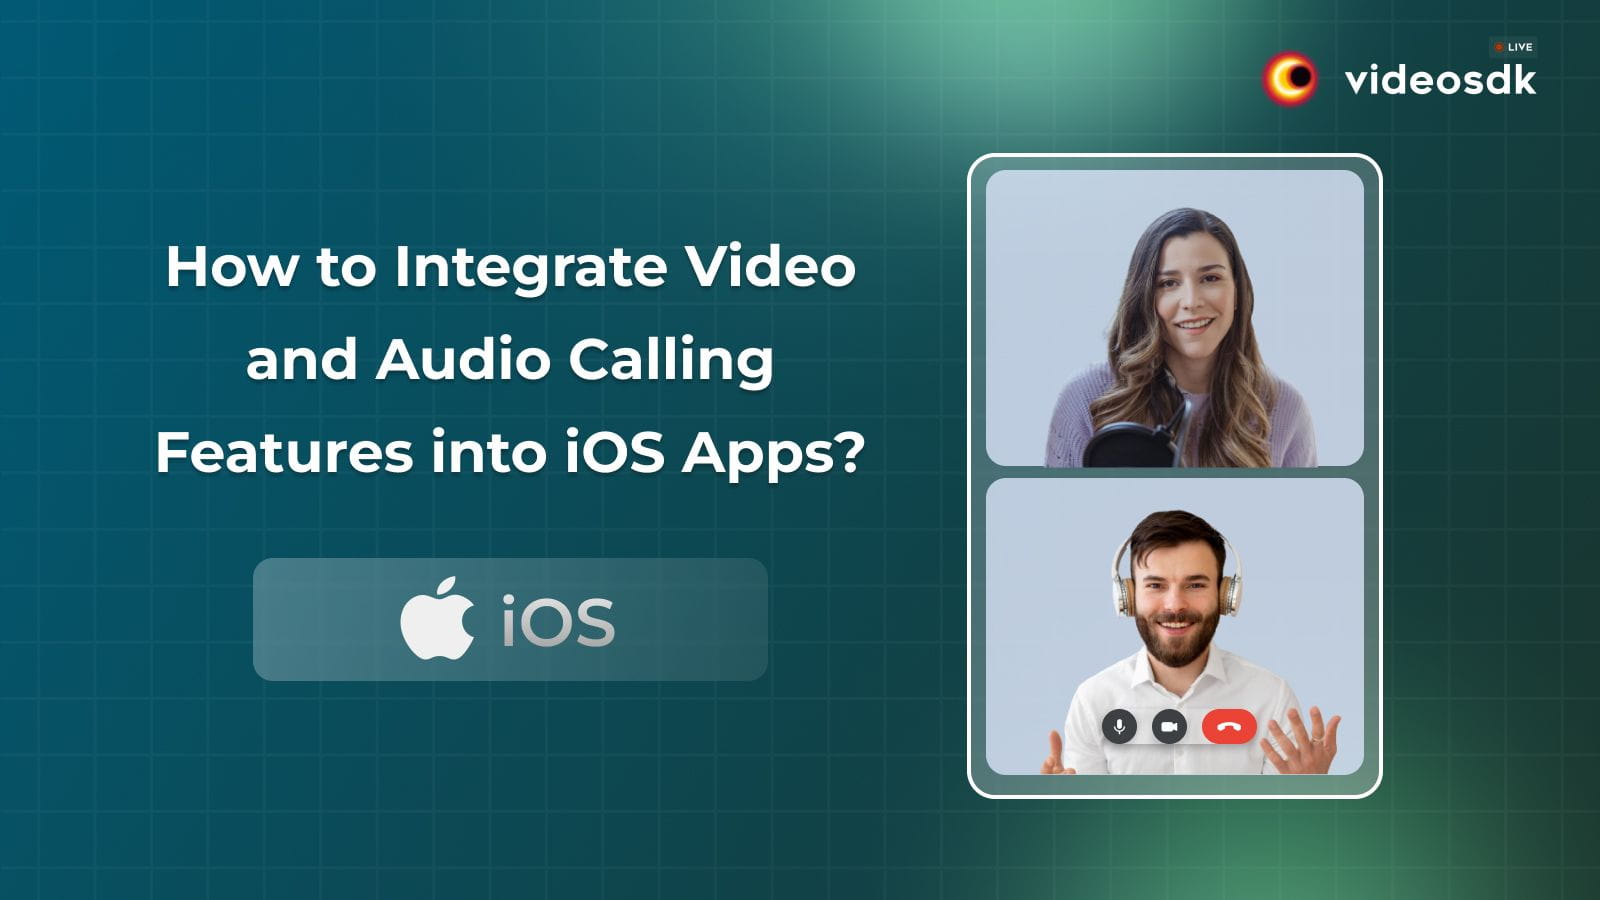 How to Integrate Video and Audio Calling Features into iOS Apps?